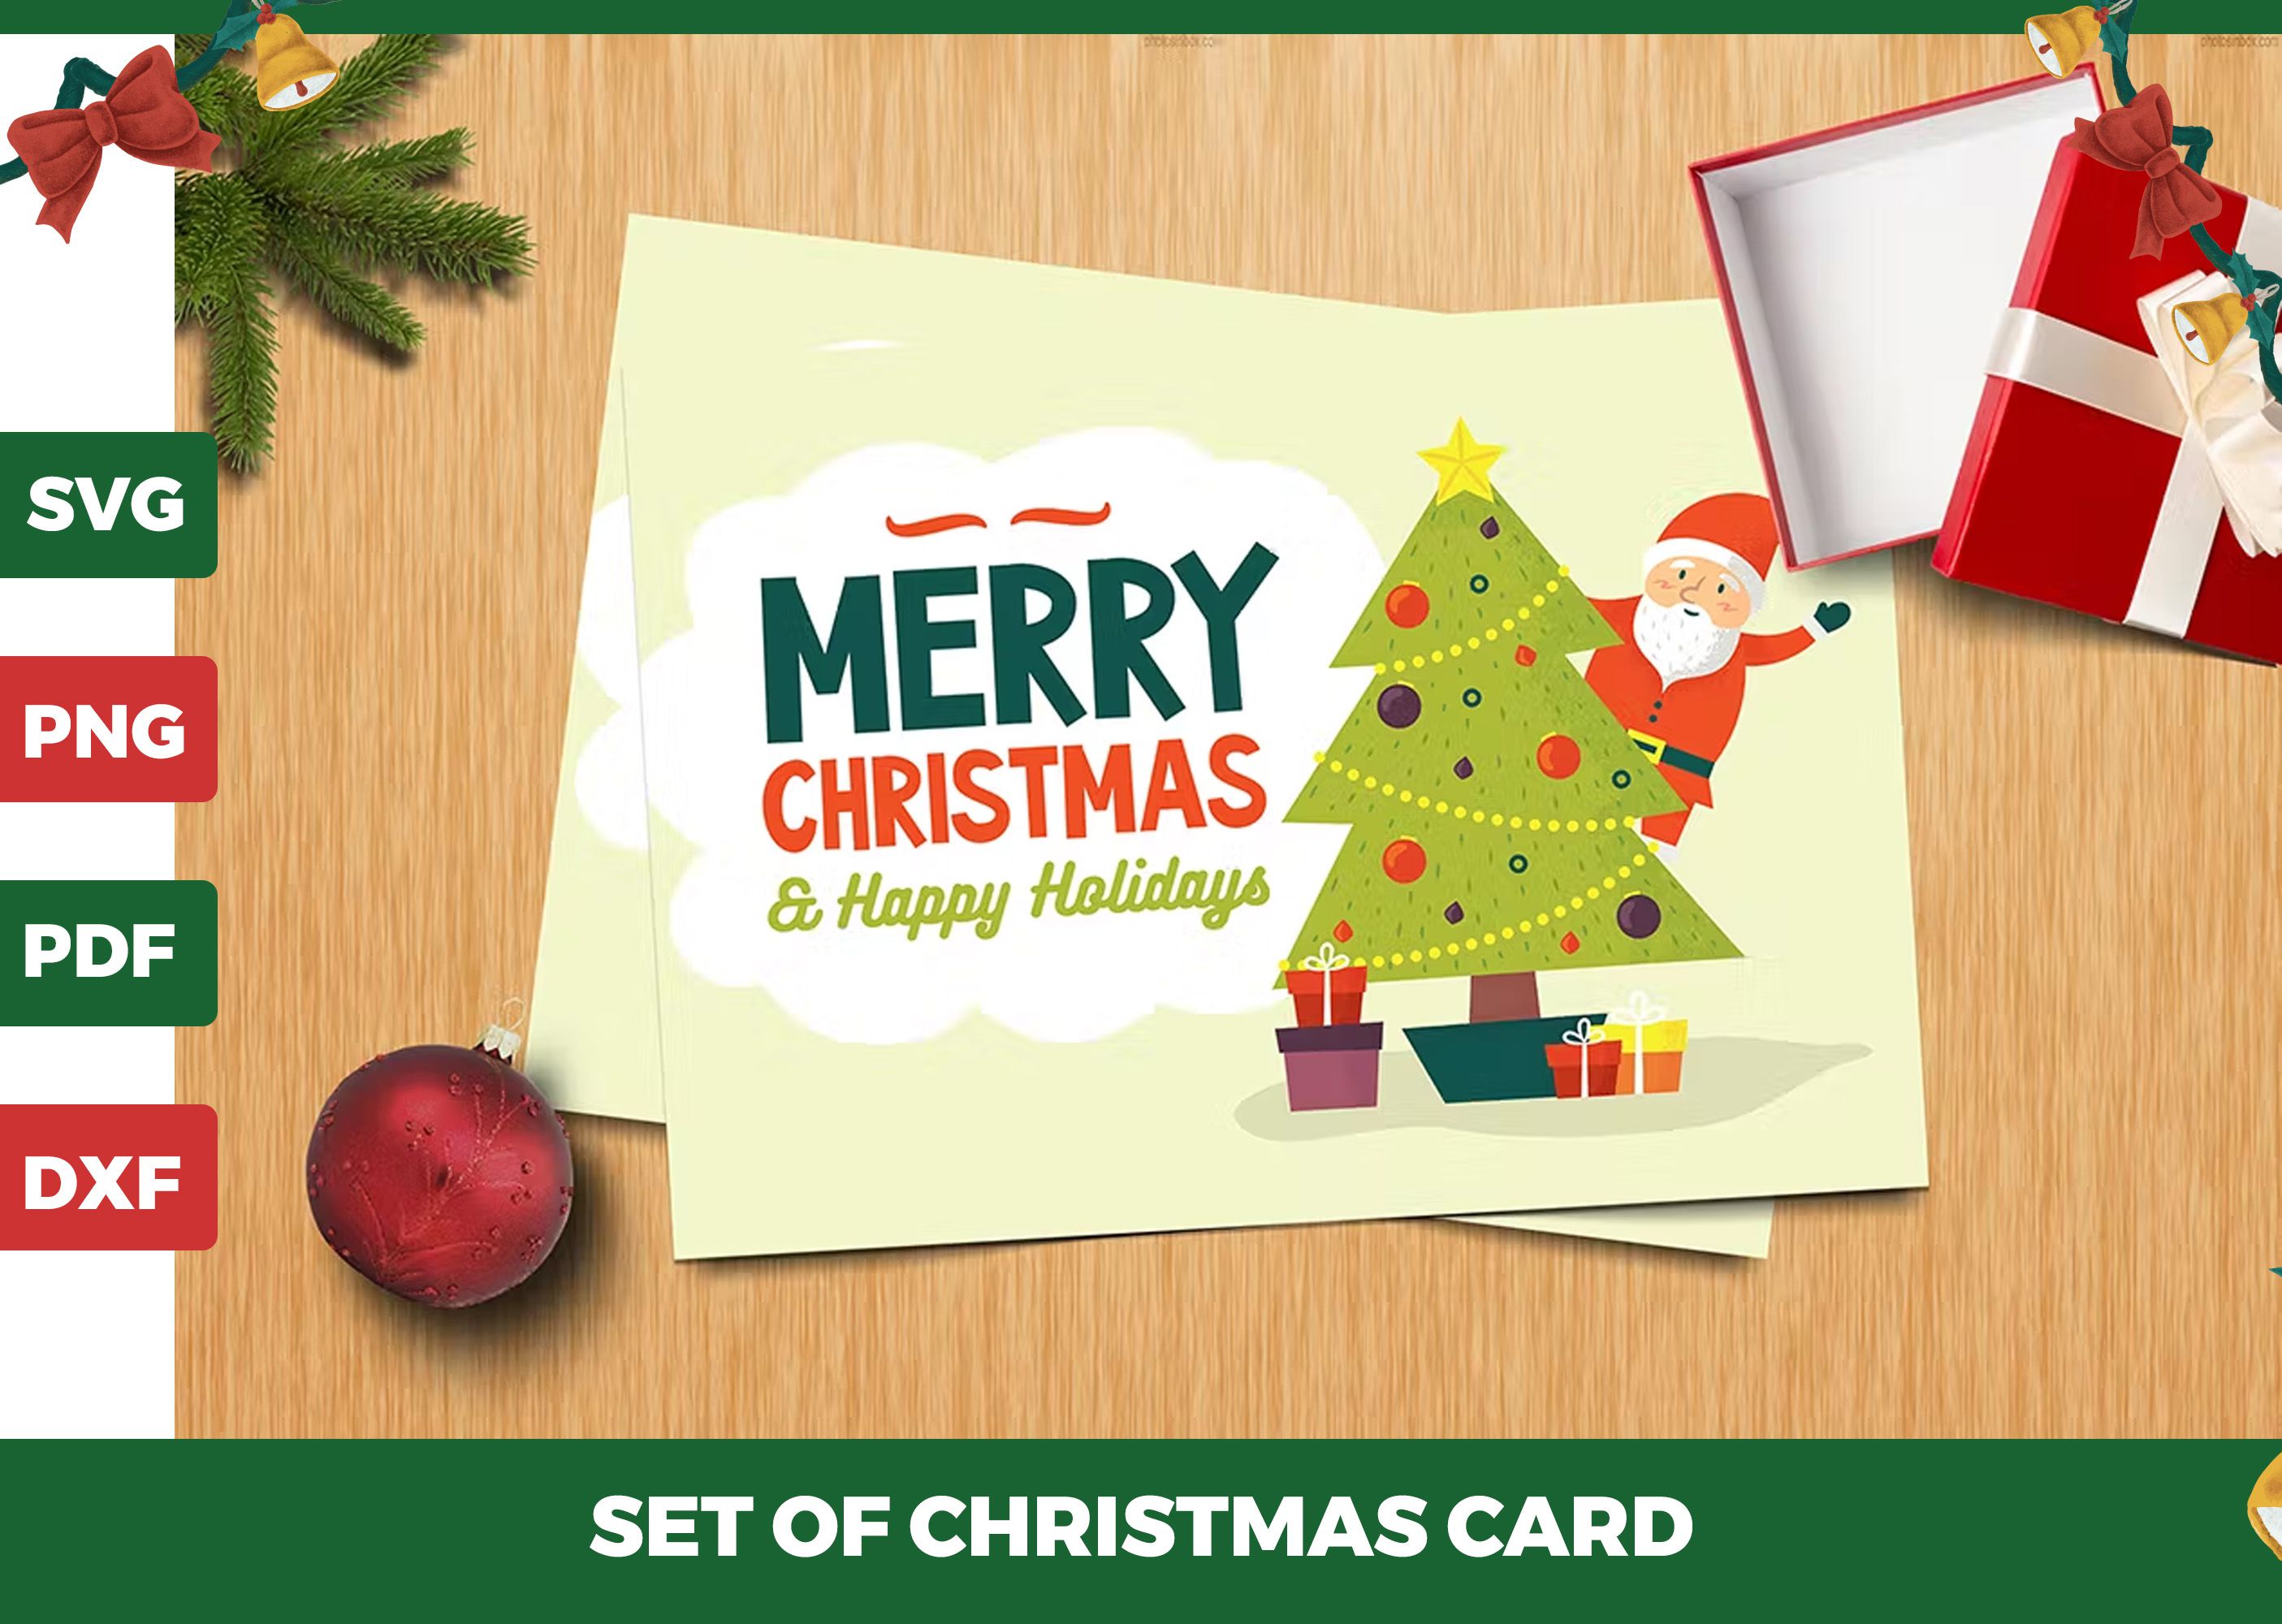 Merry Christmas Postcards preview image.